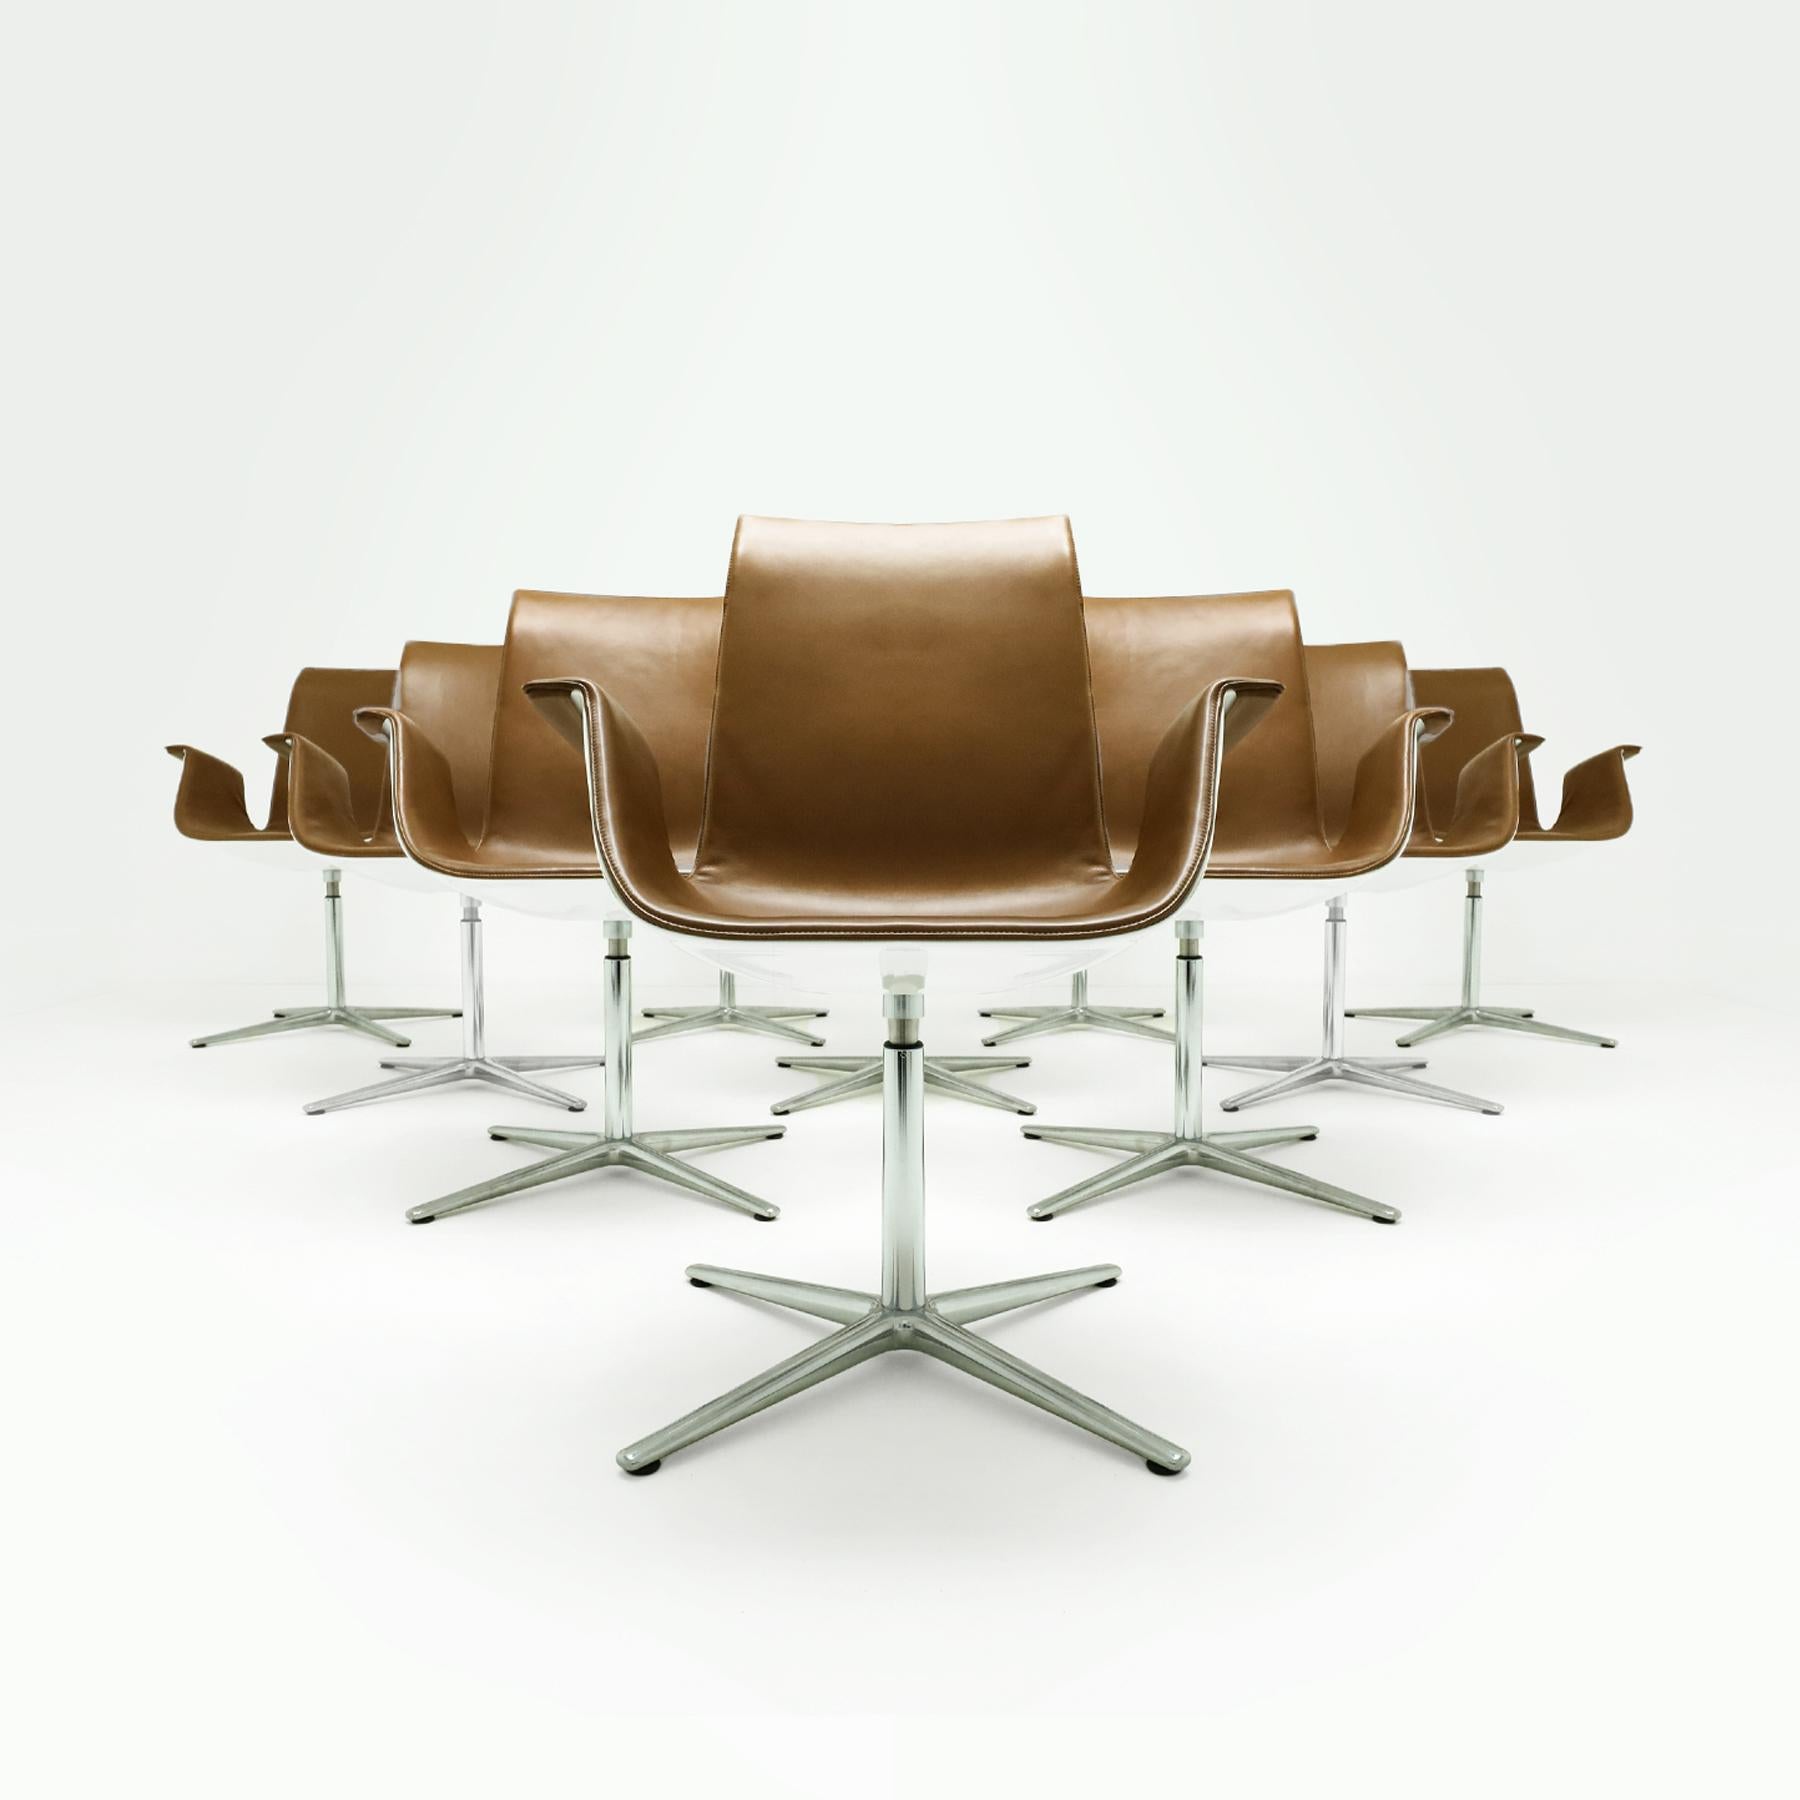 An exceptional limited edition set of 10 Danish Mid Century Preben Fabricius and Jørgen Kastlhom FK high back armchairs, model FK 6728-4G for Walter Knoll, in a cognac coloured leather with a white gloss shell and polished aluminium 4 star base. The